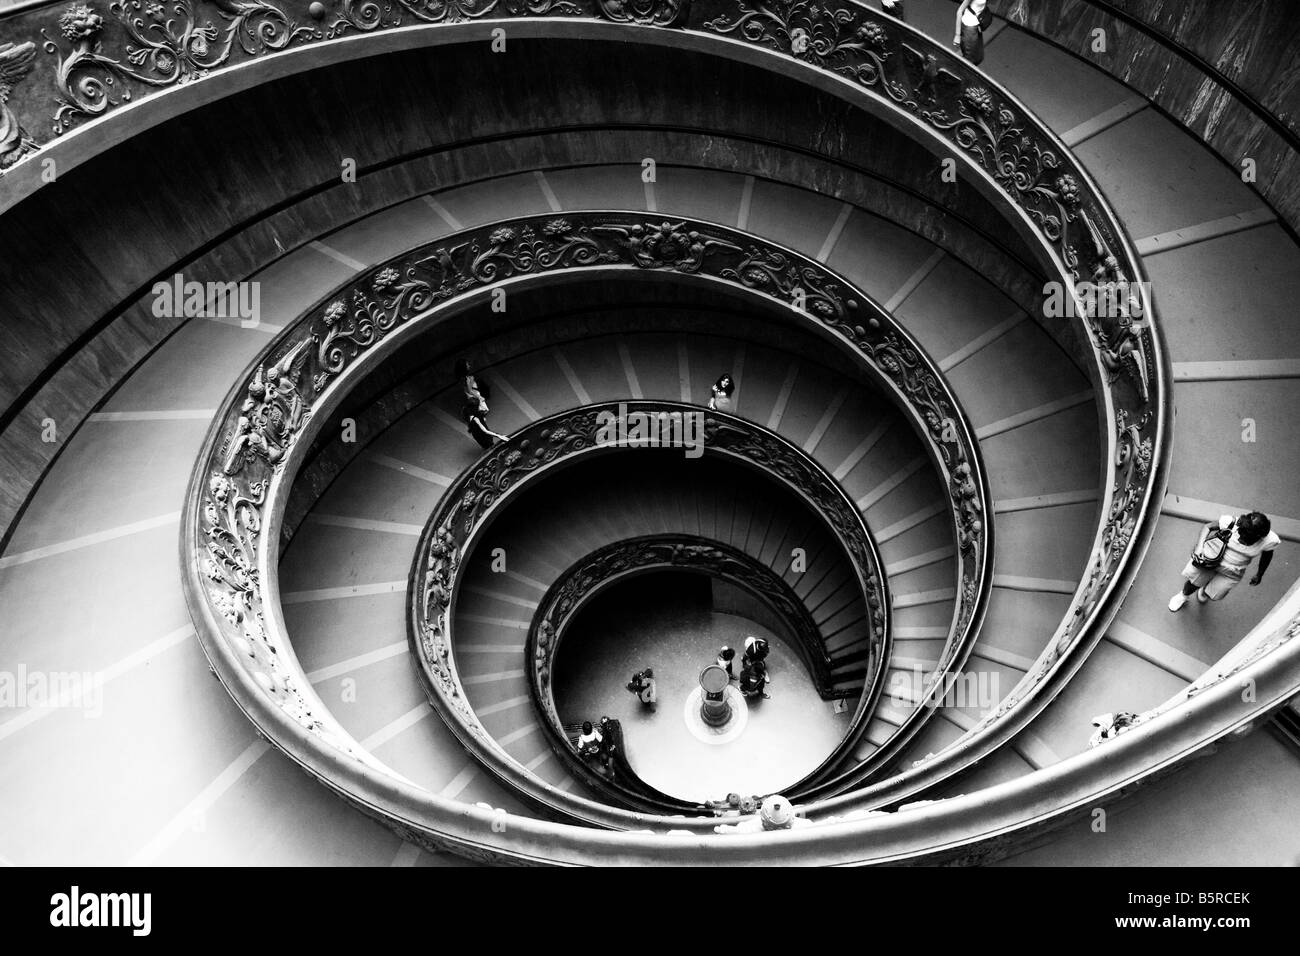 Spiral staircase inside St. Peters Basilica, Vatican City, Rome, Italy Stock Photo